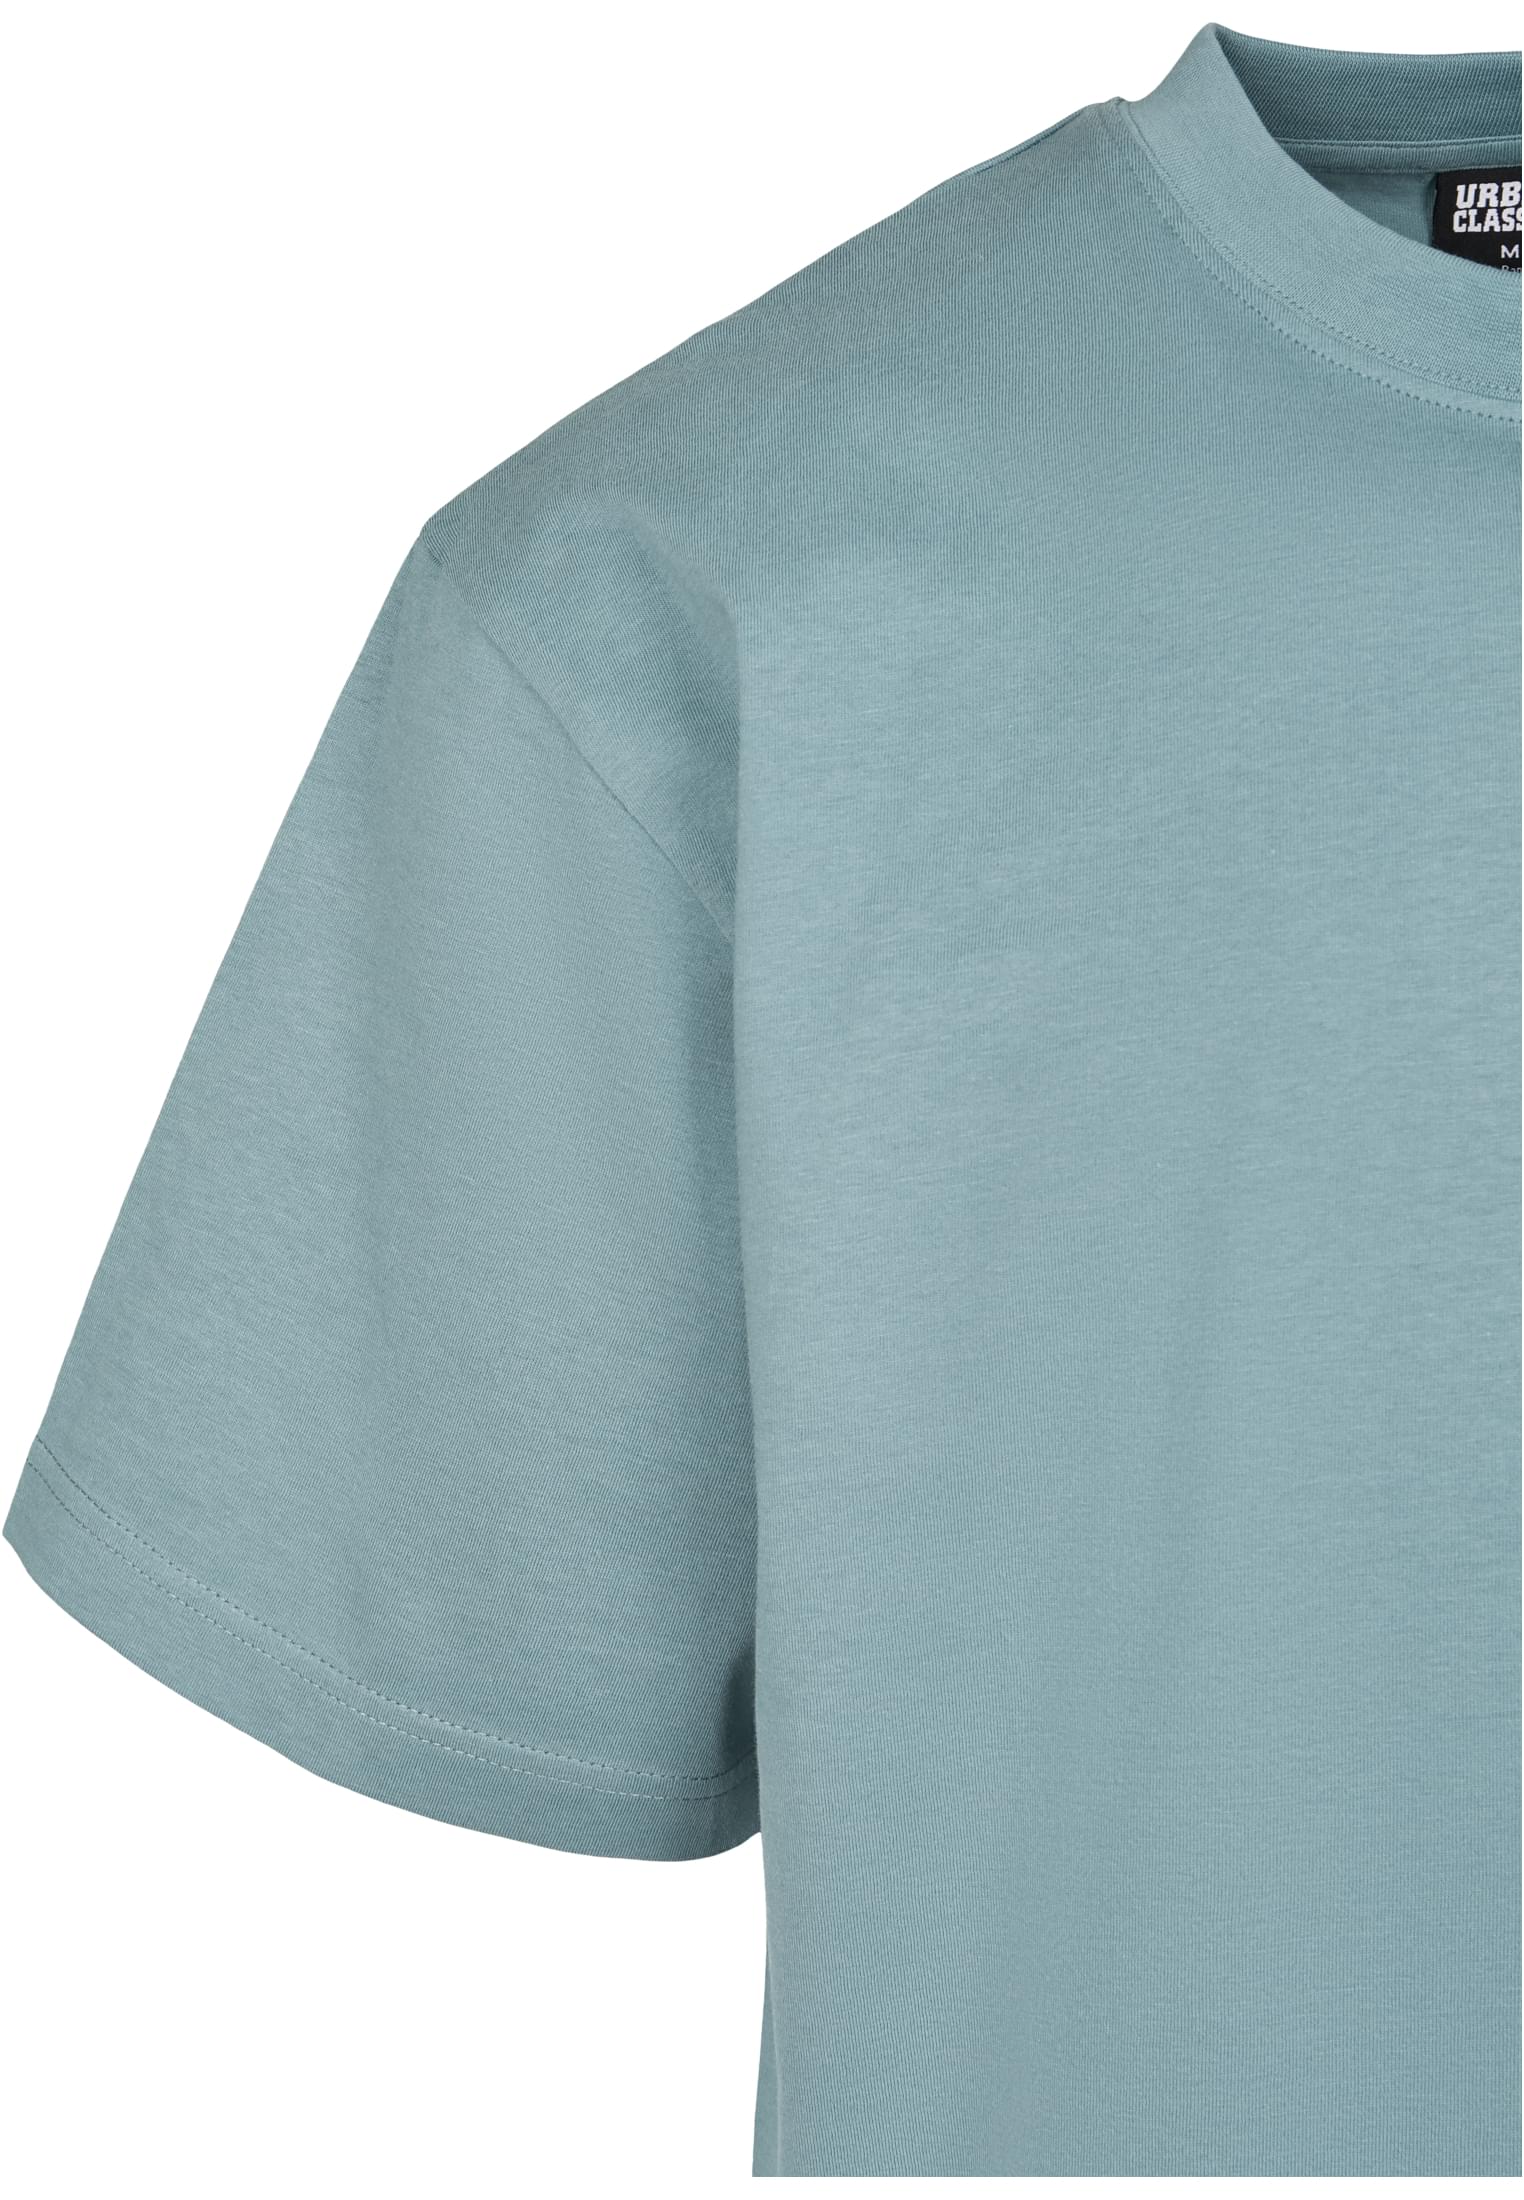 Plus Size Tall Tee in Farbe dusty blue